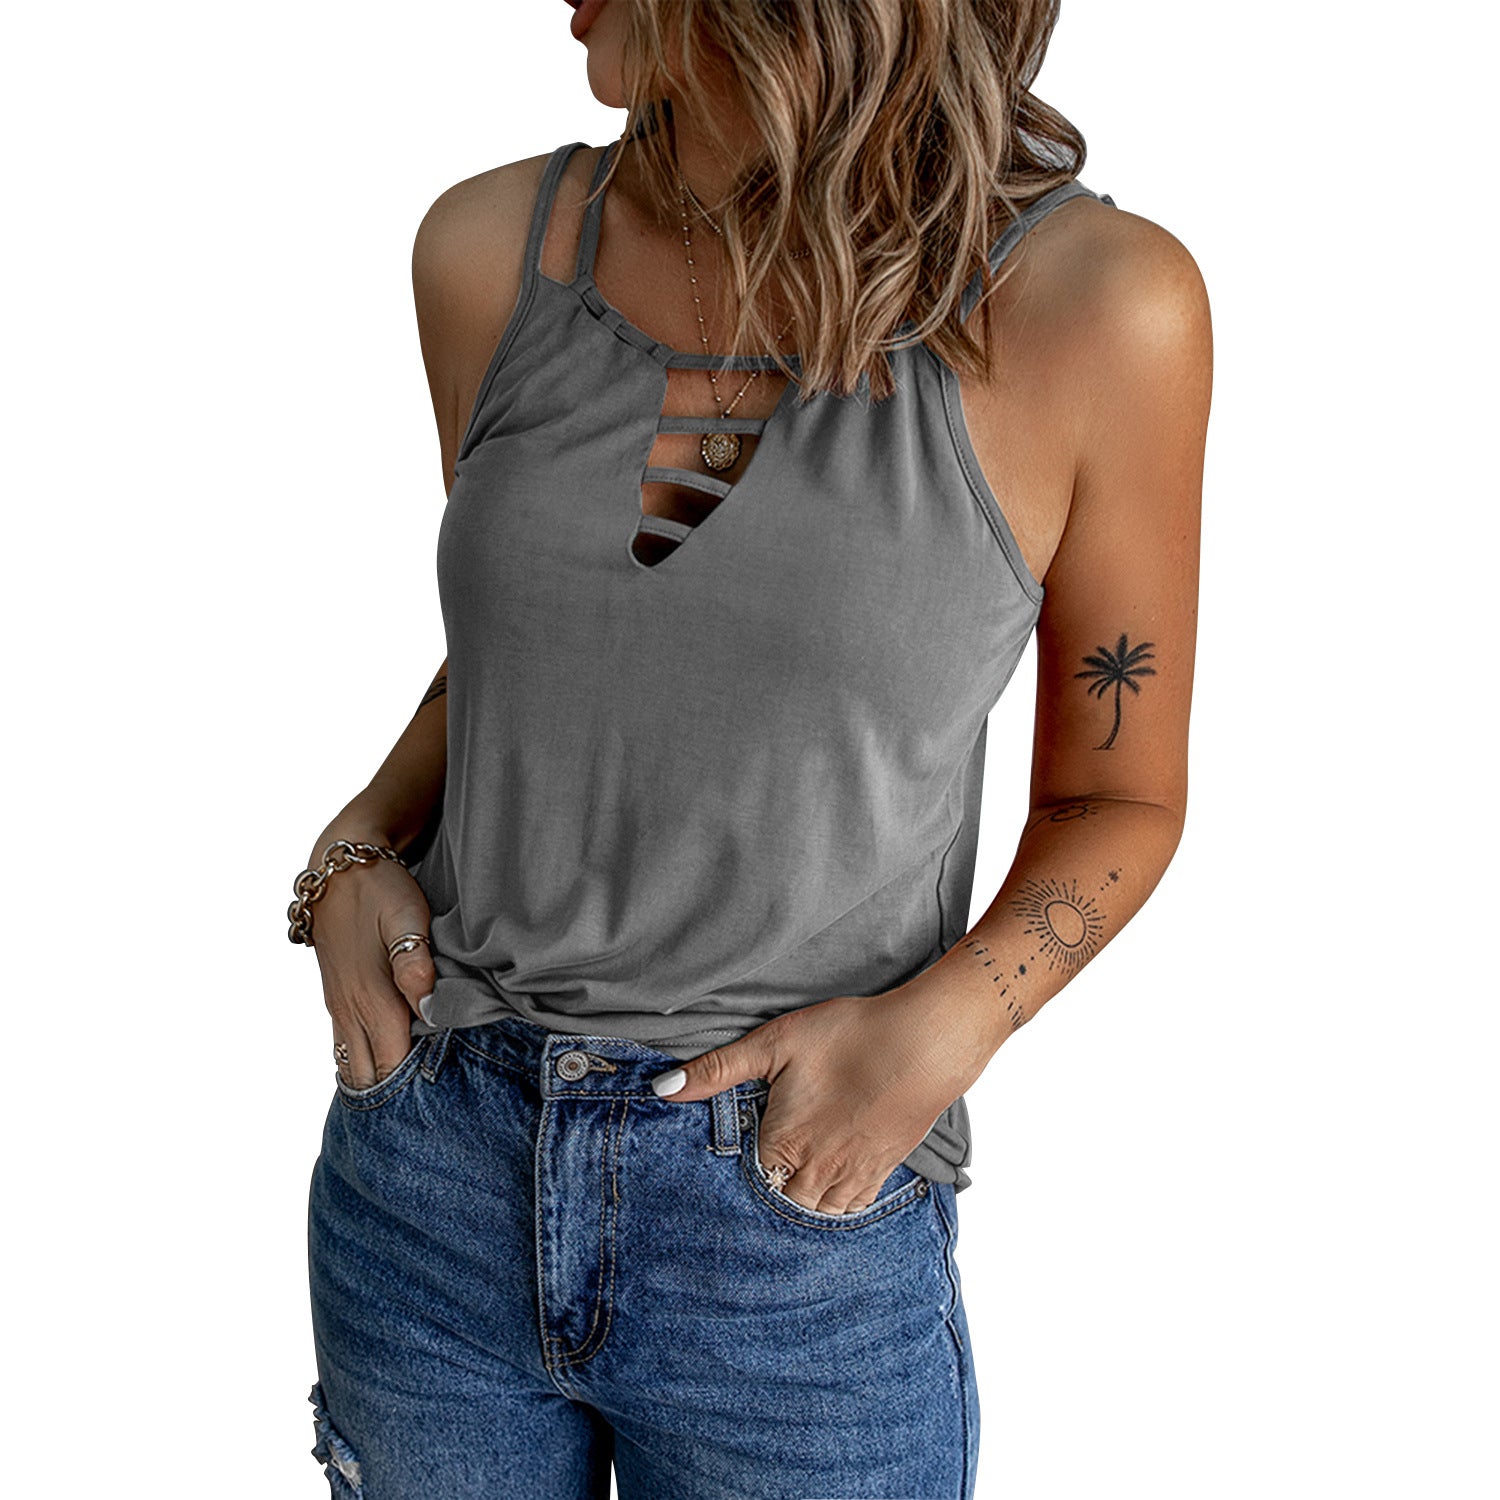 Women's Summer Lady Sexy Hollow Shoulder Strap Tops